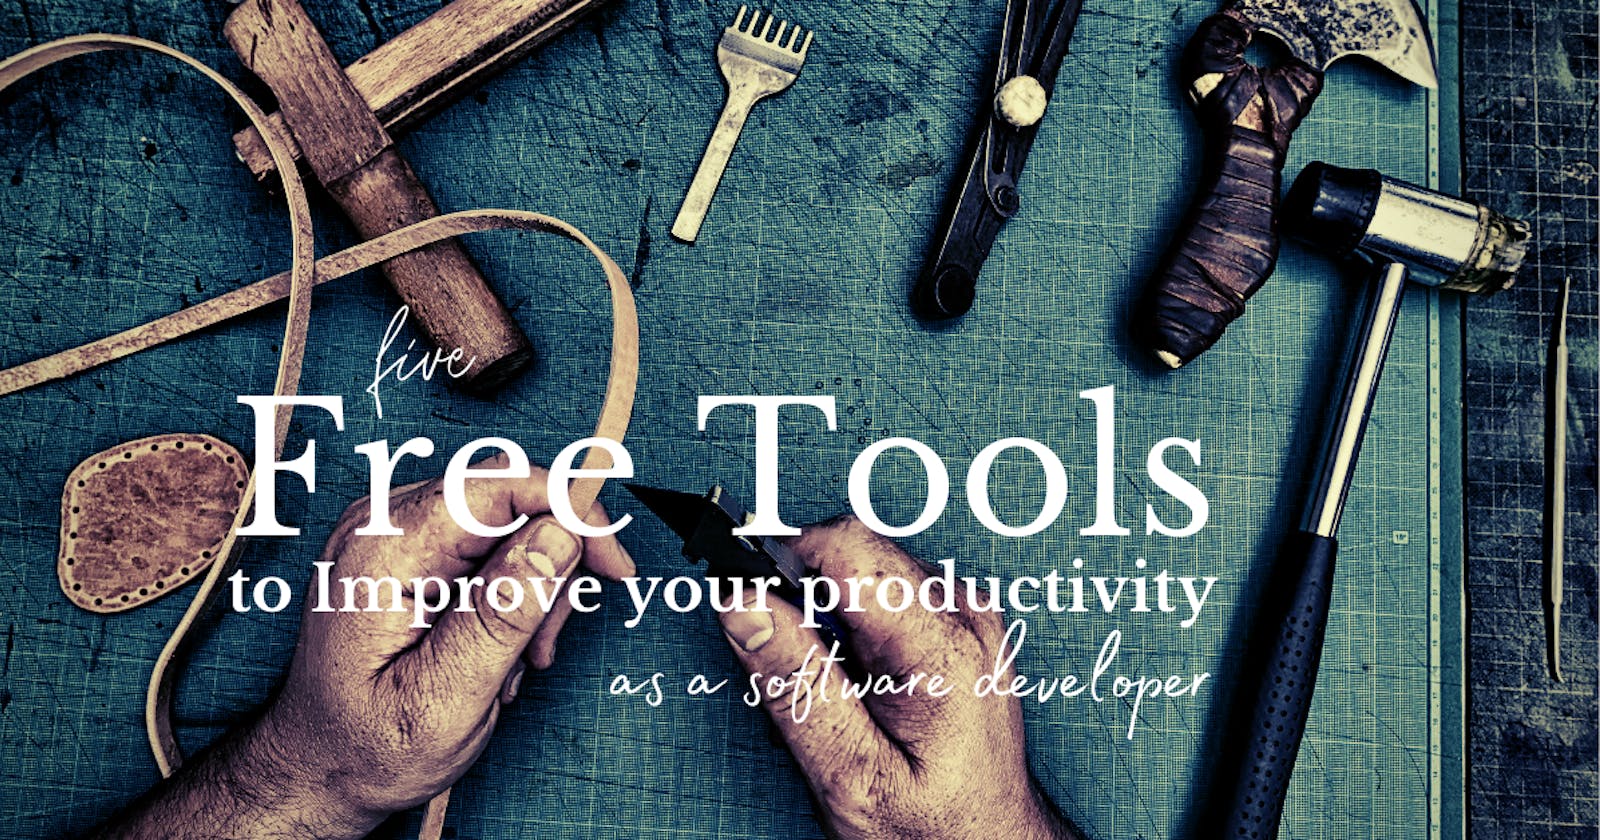 Free tools that Improve your productivity as a Developer.